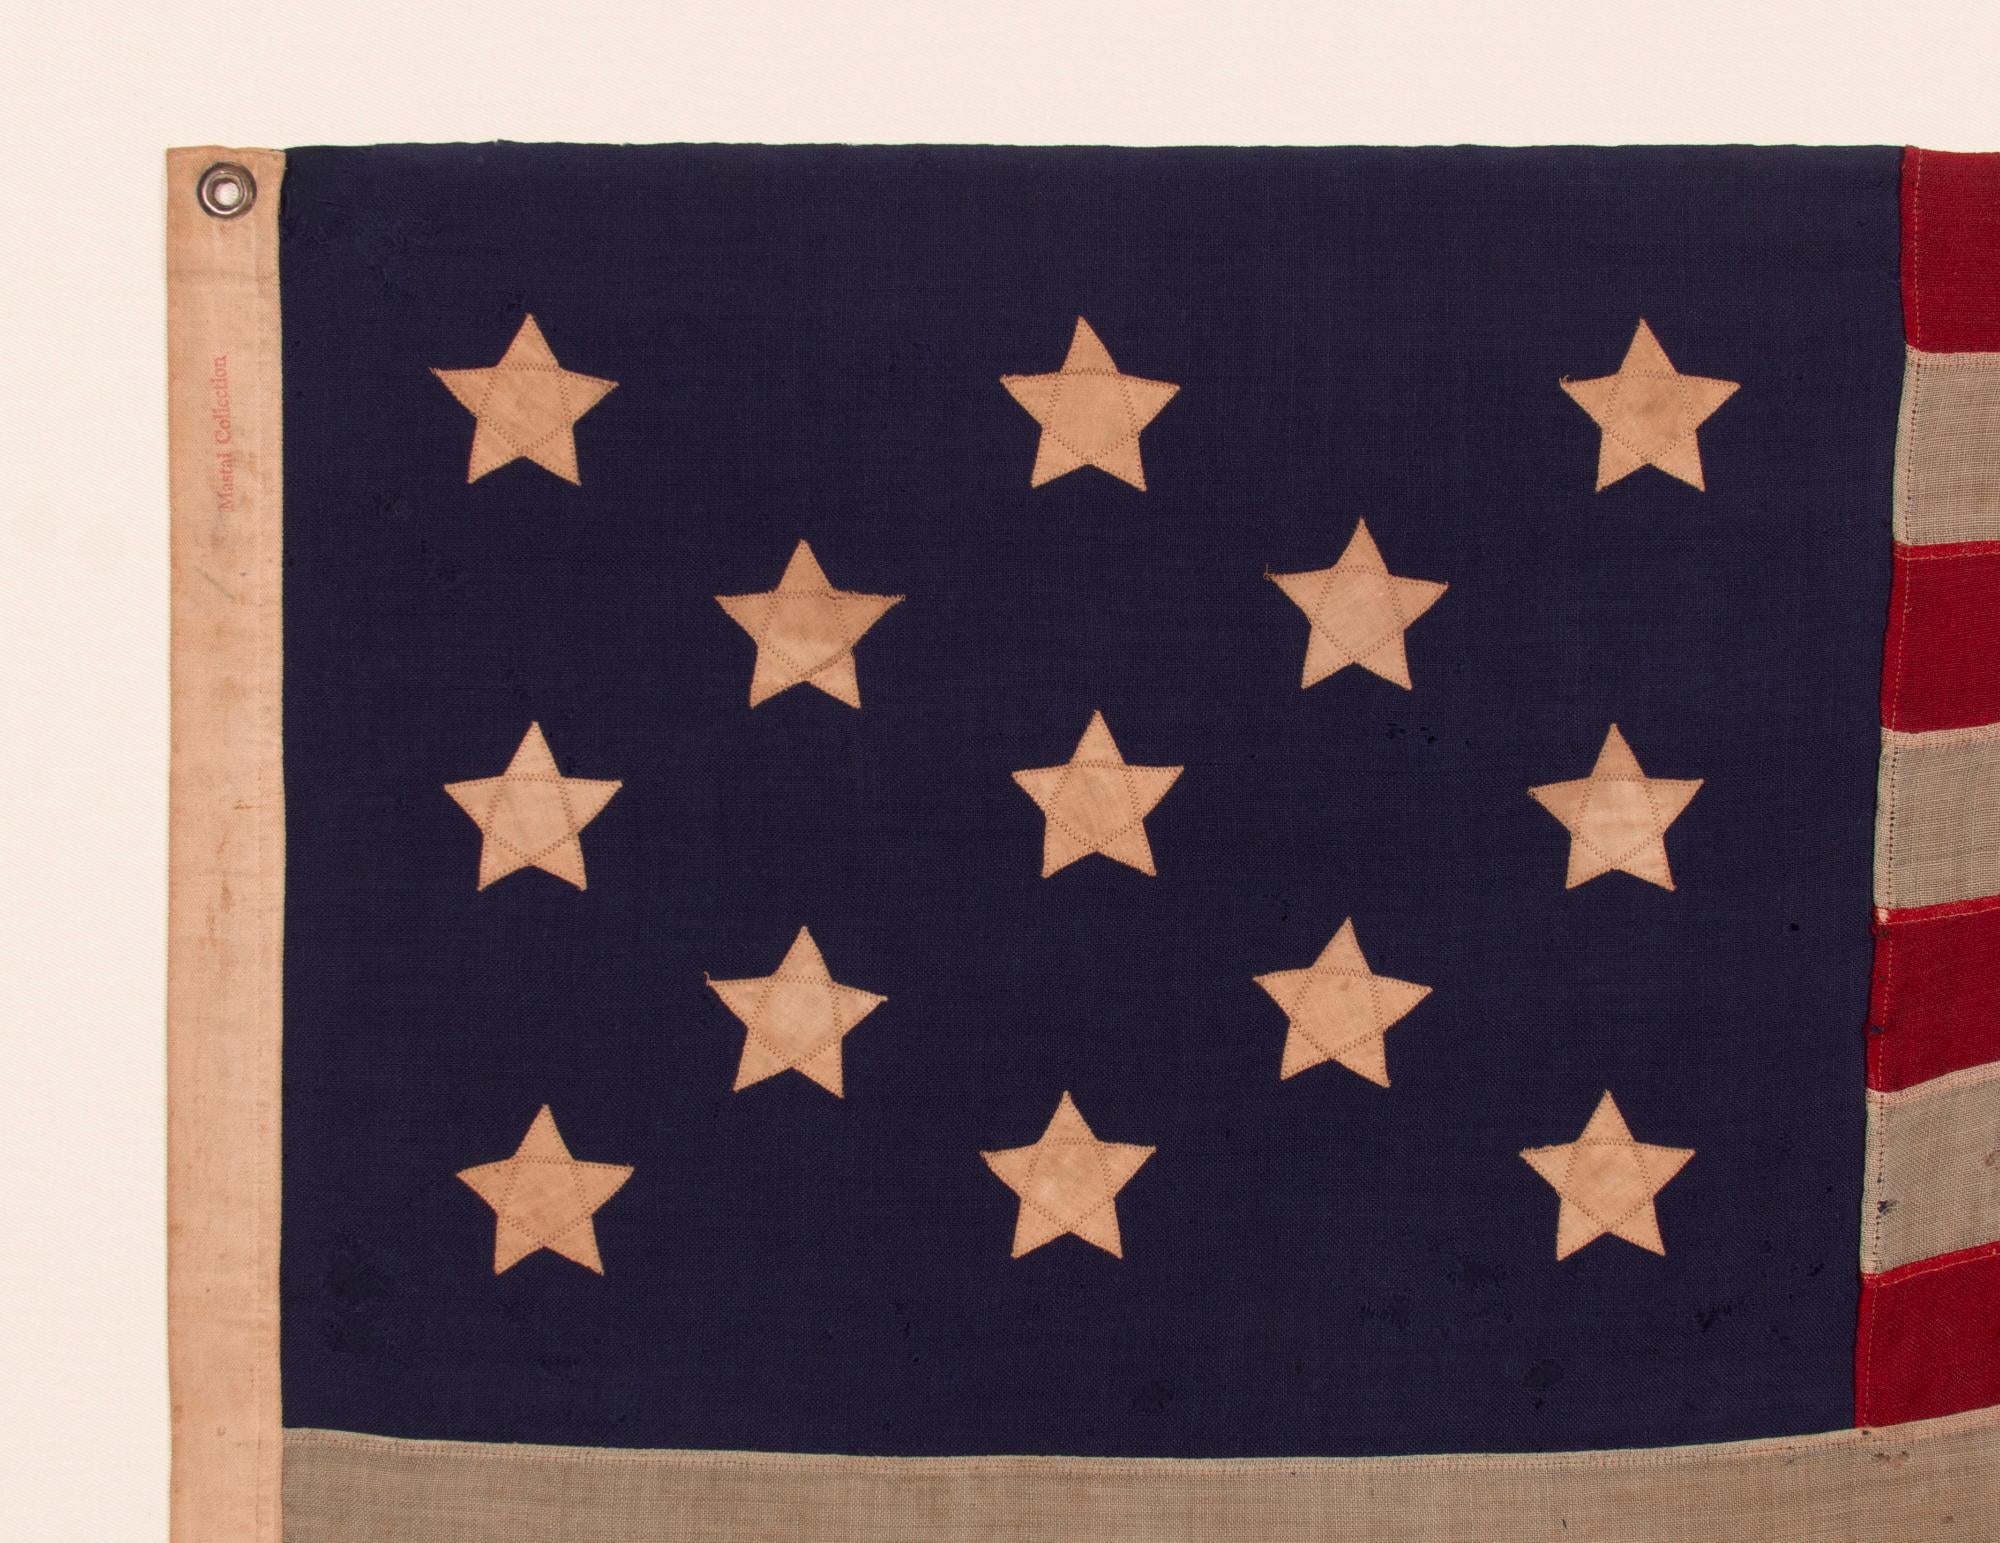 13 STARS WITH SHORT, CONICAL ARMS ON A SMALL SCALE, ANTIQUE AMERICAN FLAG MADE DURING THE LAST DECADE F THE 19TH CENTURY; POSSIBLY OF PHILADELPHIA ORIGIN; FORMERLY IN THE COLLECTION OF BOLESLAW & MARIE D'OTRANGE MASTAI, THE FIRST MAJOR COLLECTORS TO